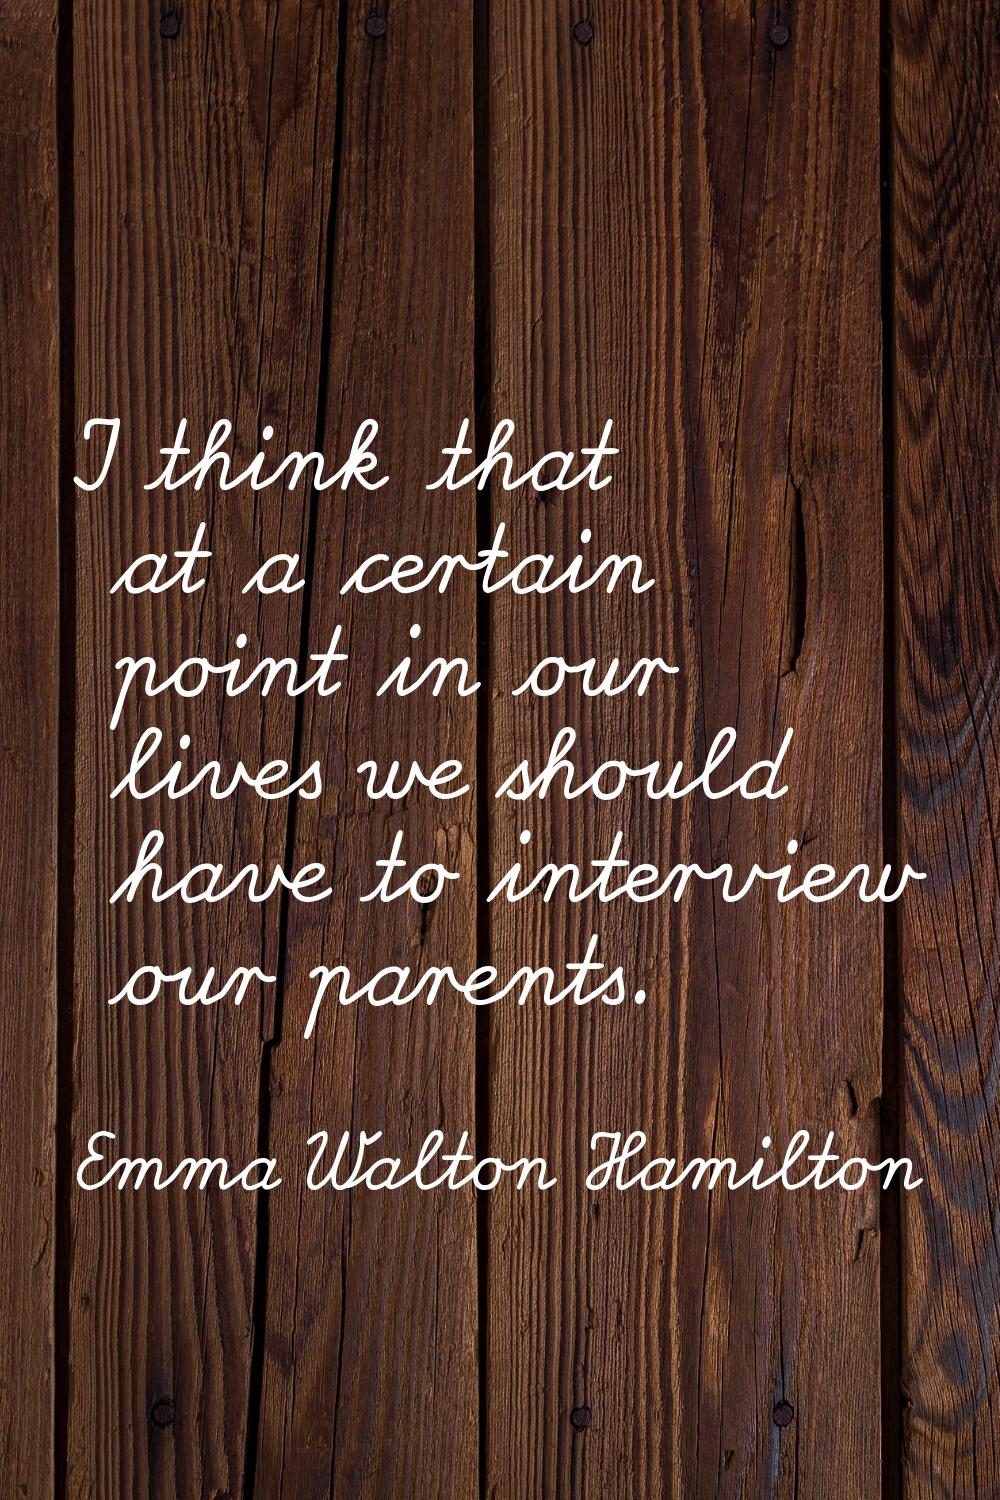 I think that at a certain point in our lives we should have to interview our parents.